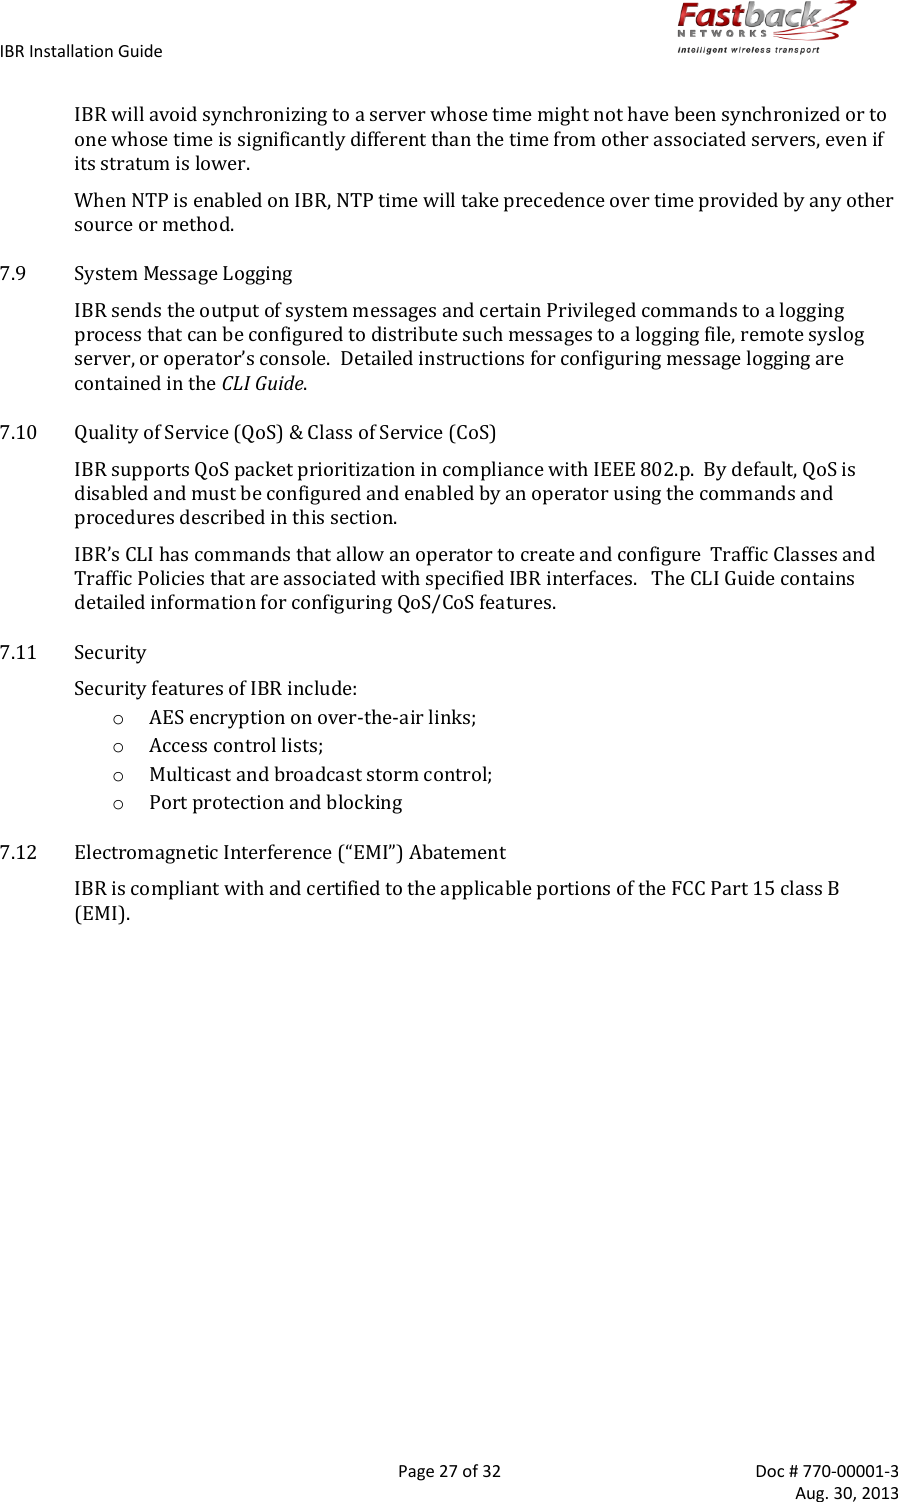 IBR Installation Guide        Page 27 of 32  Doc # 770-00001-3     Aug. 30, 2013   IBR will avoid synchronizing to a server whose time might not have been synchronized or to one whose time is significantly different than the time from other associated servers, even if its stratum is lower. When NTP is enabled on IBR, NTP time will take precedence over time provided by any other source or method. 7.9 System Message Logging IBR sends the output of system messages and certain Privileged commands to a logging process that can be configured to distribute such messages to a logging file, remote syslog server, or operator’s console.  Detailed instructions for configuring message logging are contained in the CLI Guide. 7.10 Quality of Service (QoS) &amp; Class of Service (CoS) IBR supports QoS packet prioritization in compliance with IEEE 802.p.  By default, QoS is disabled and must be configured and enabled by an operator using the commands and procedures described in this section. IBR’s CLI has commands that allow an operator to create and configure  Traffic Classes and Traffic Policies that are associated with specified IBR interfaces.   The CLI Guide contains detailed information for configuring QoS/CoS features. 7.11 Security Security features of IBR include: o AES encryption on over-the-air links;  o Access control lists; o Multicast and broadcast storm control; o Port protection and blocking 7.12 Electromagnetic Interference (“EMI”) Abatement IBR is compliant with and certified to the applicable portions of the FCC Part 15 class B (EMI).  